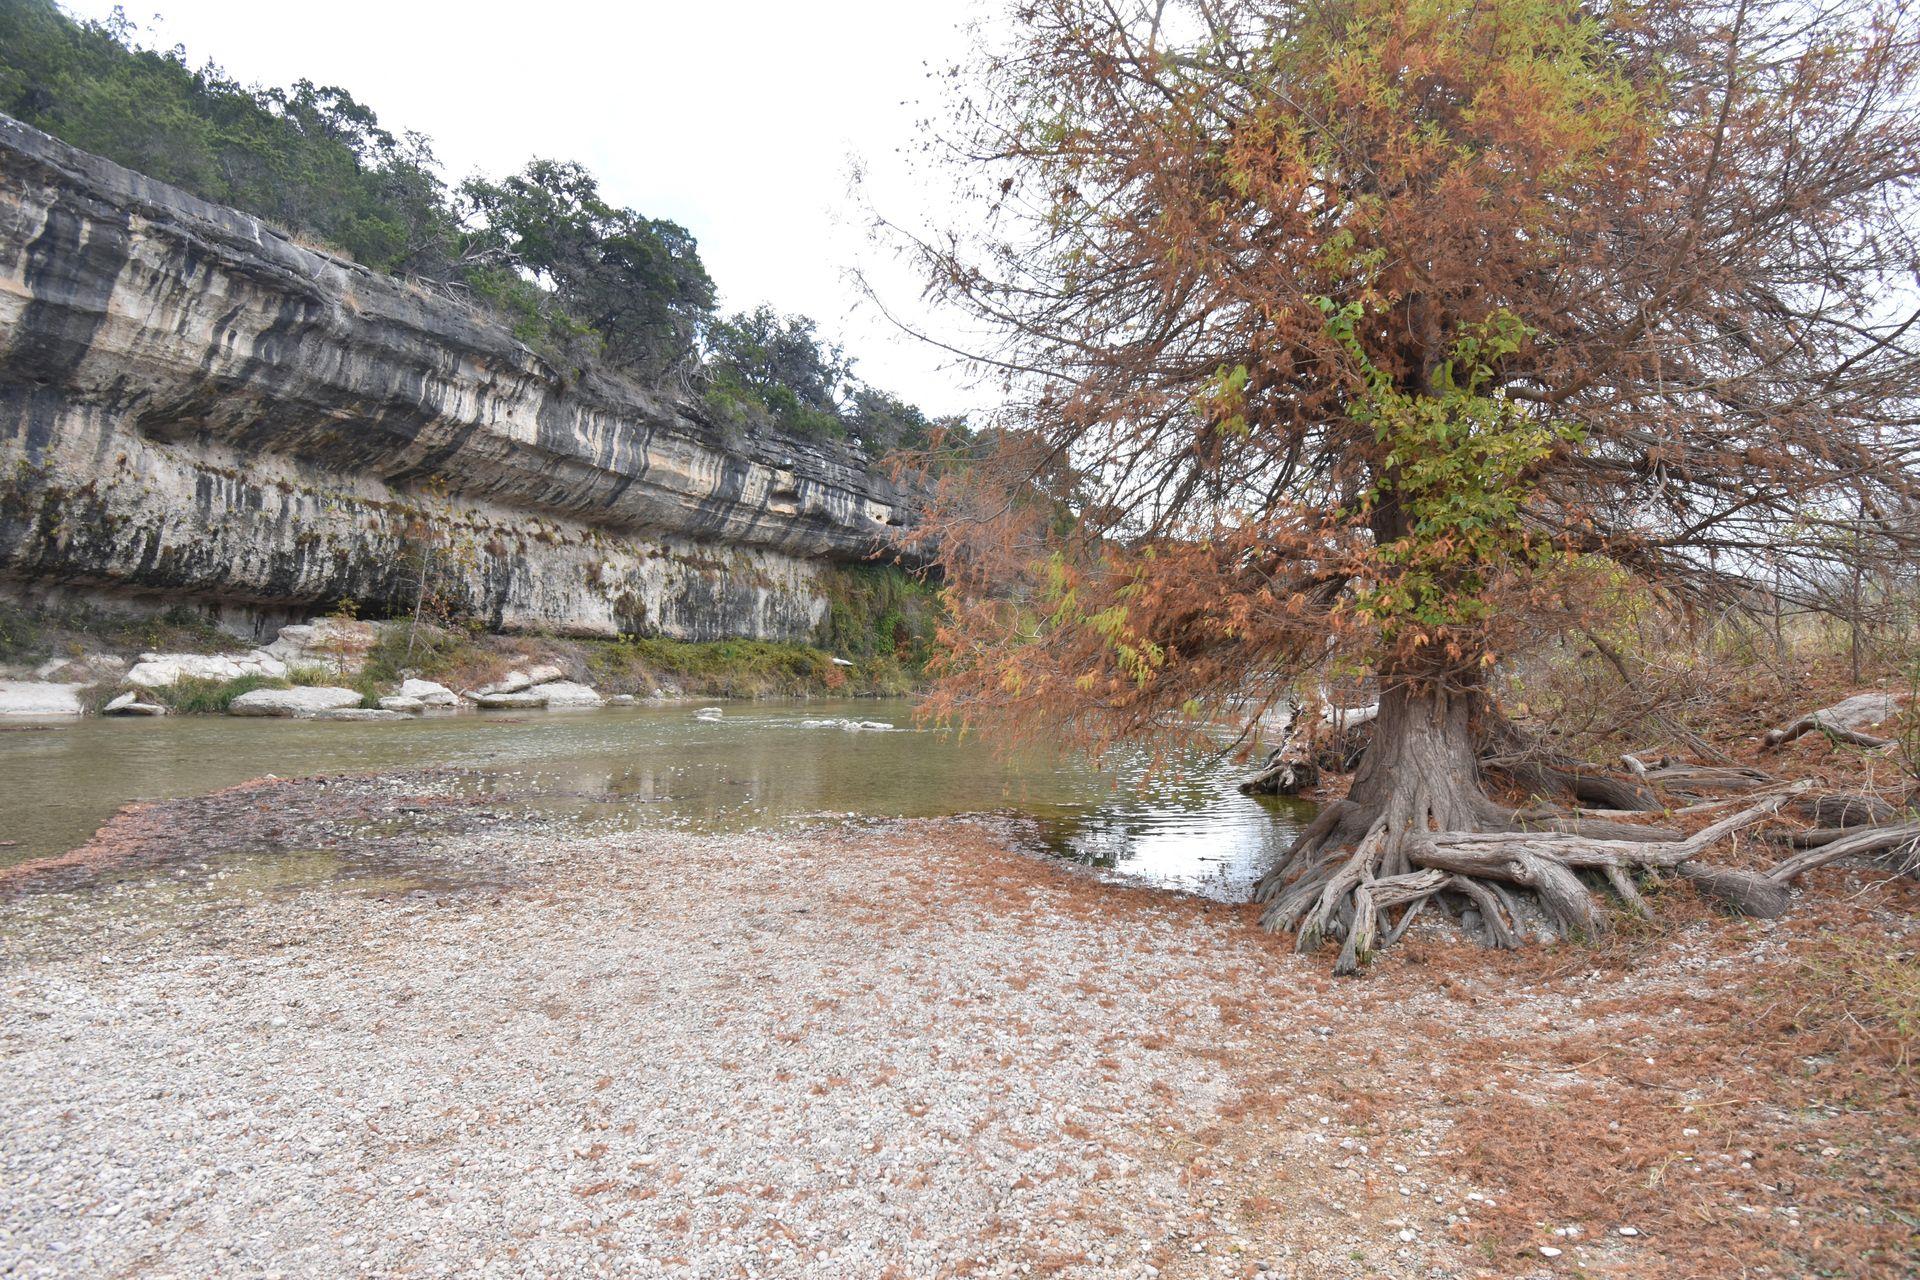 A tree with red leaves sits on the riverbank of Guadalupe River. On the other side of the river, there is a striped rock wall.